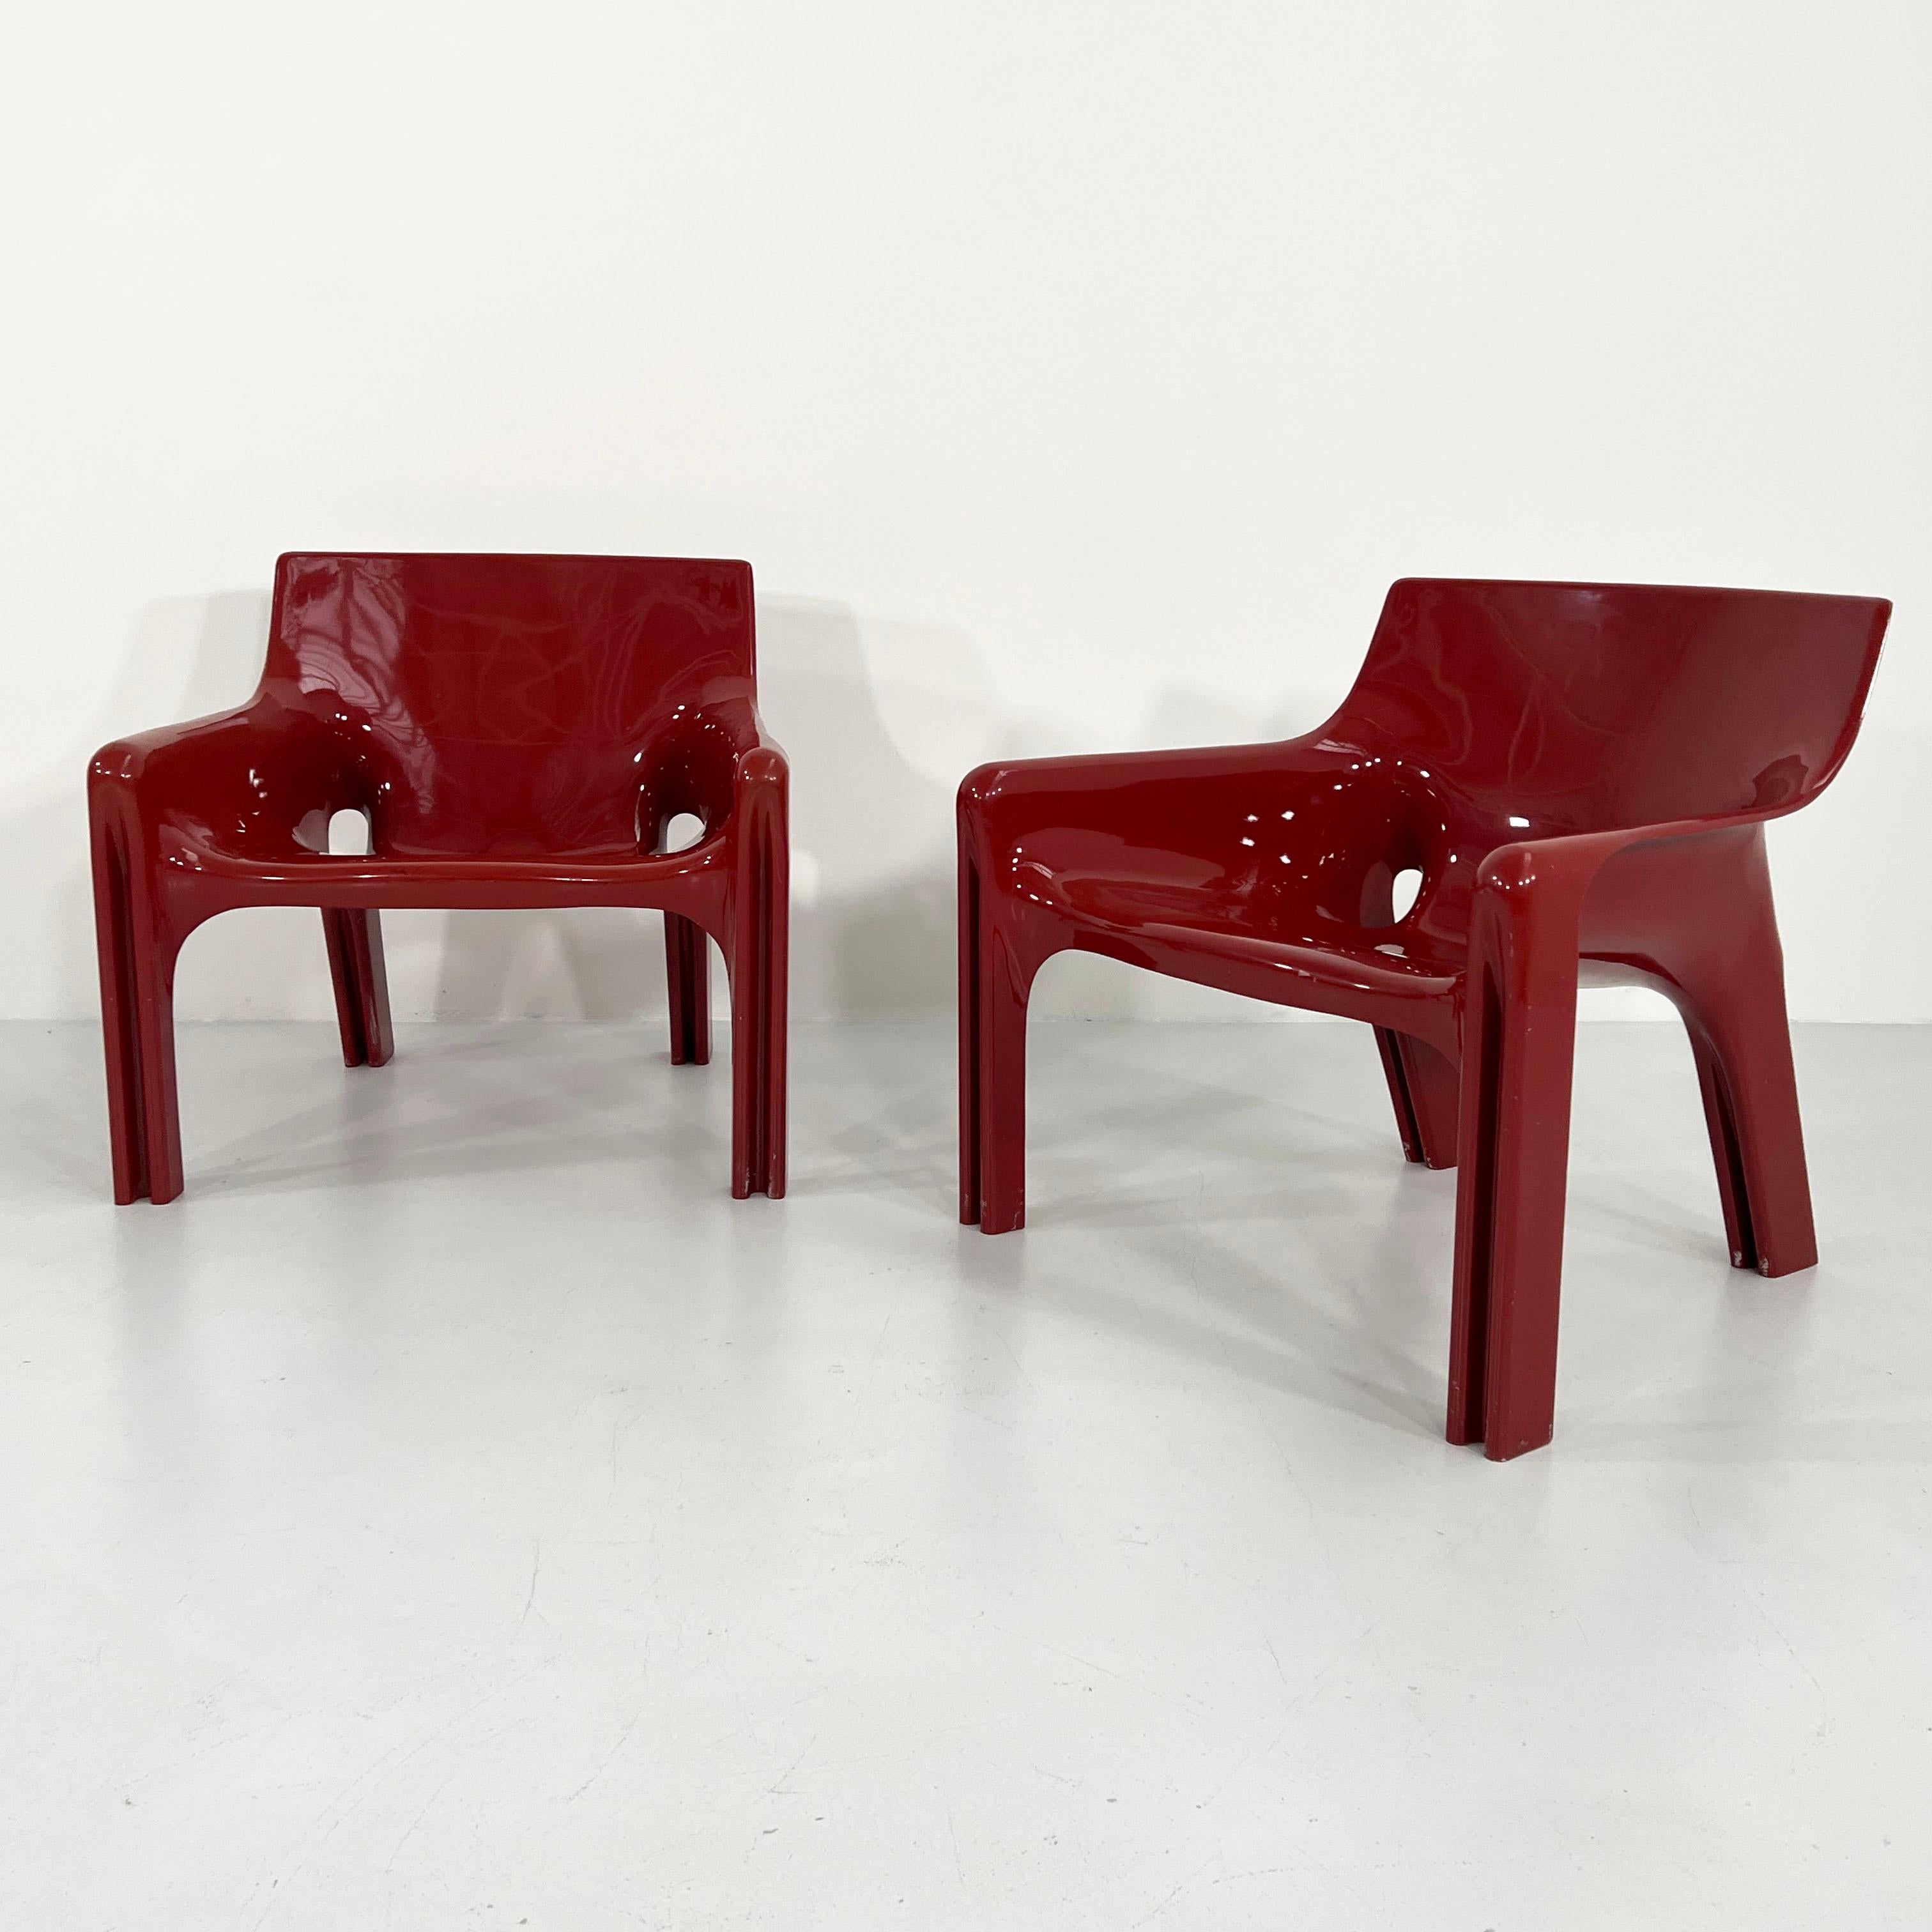 Pair of Burgundy Vicario Lounge Chair by Vico Magistretti for Artemide, 1970s 2